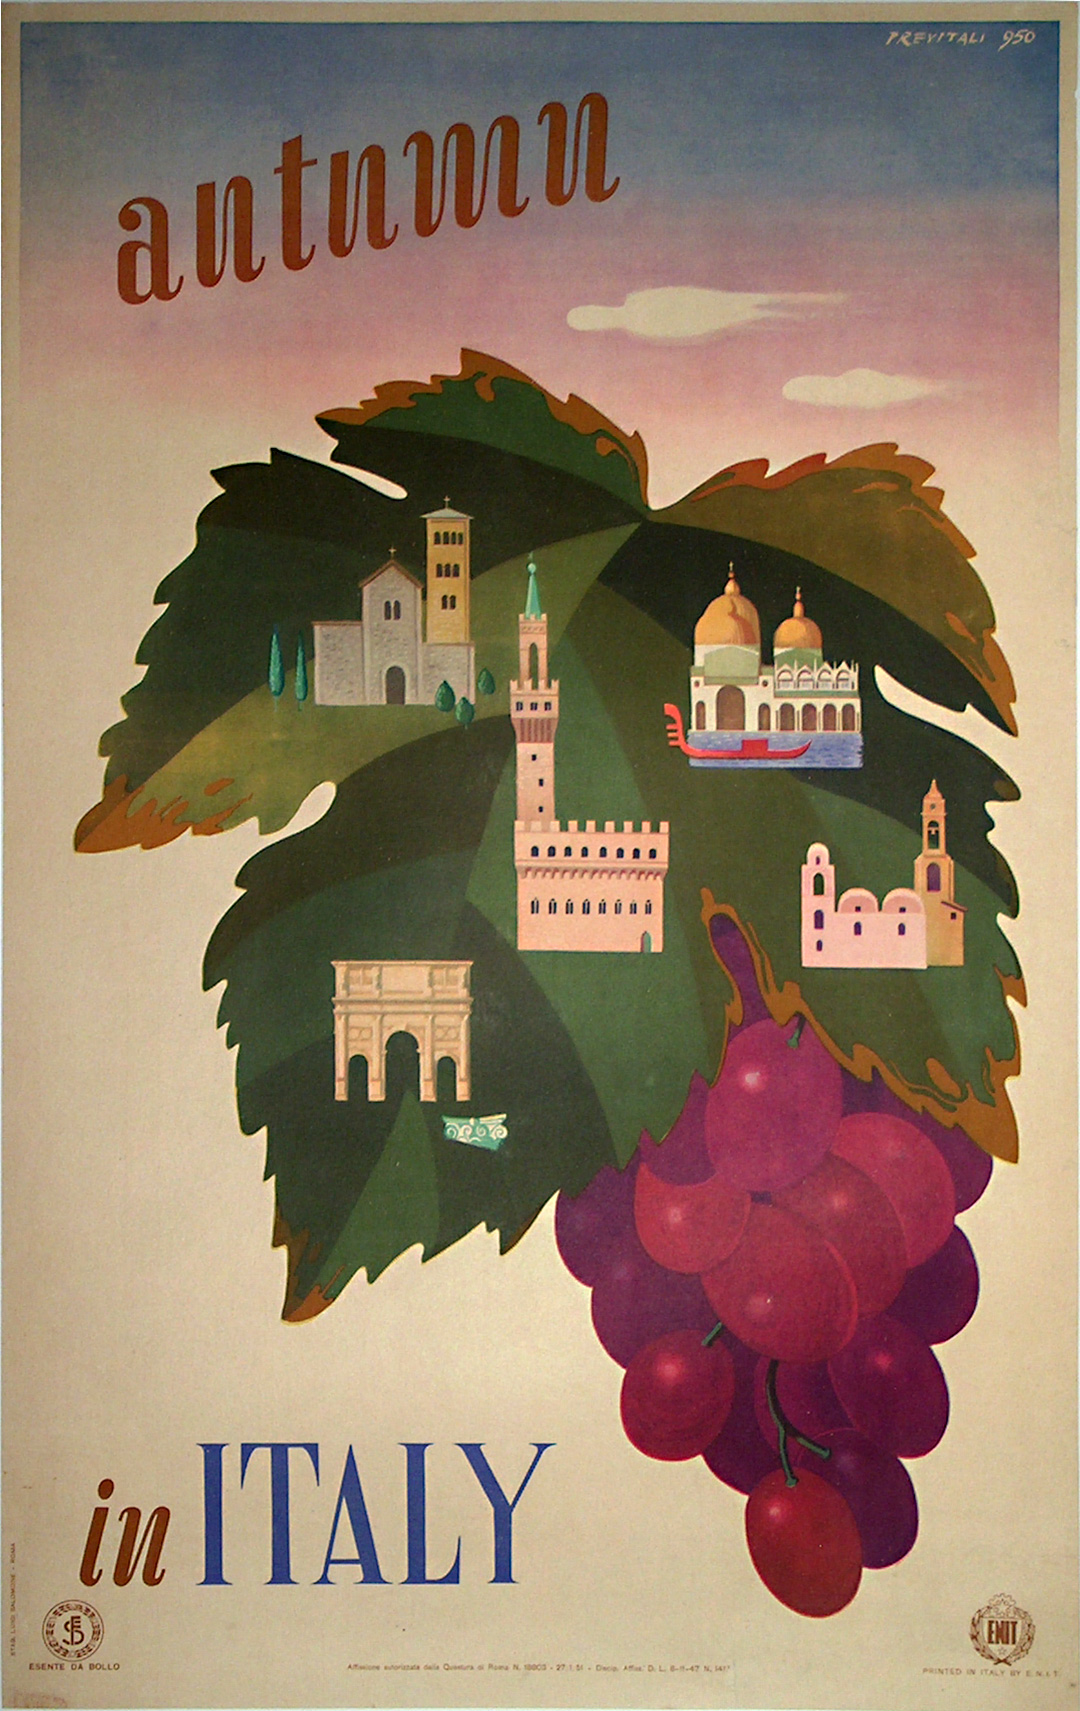 Original vintage poster: Autumn in Italy for sale at posterteam.com